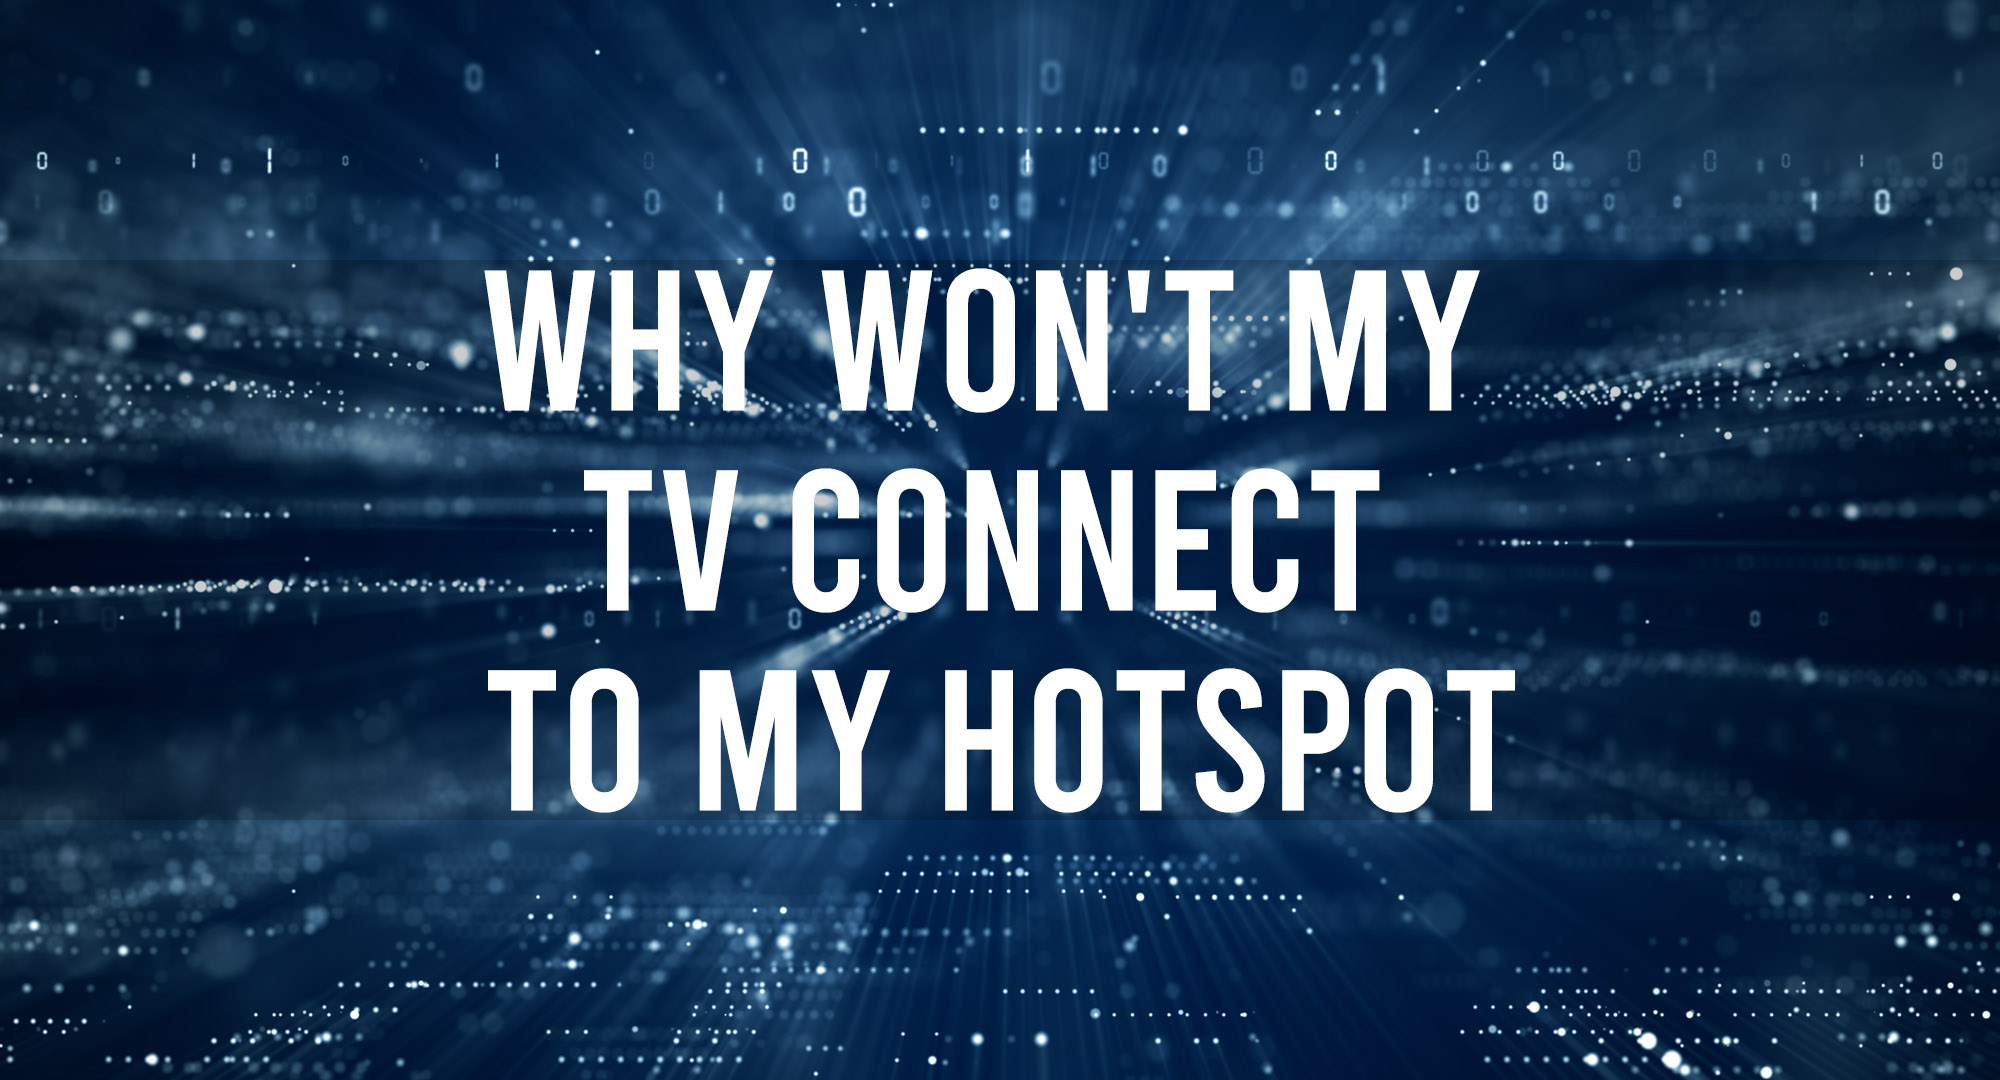 Why Won't my TV Connect To My Hotspot